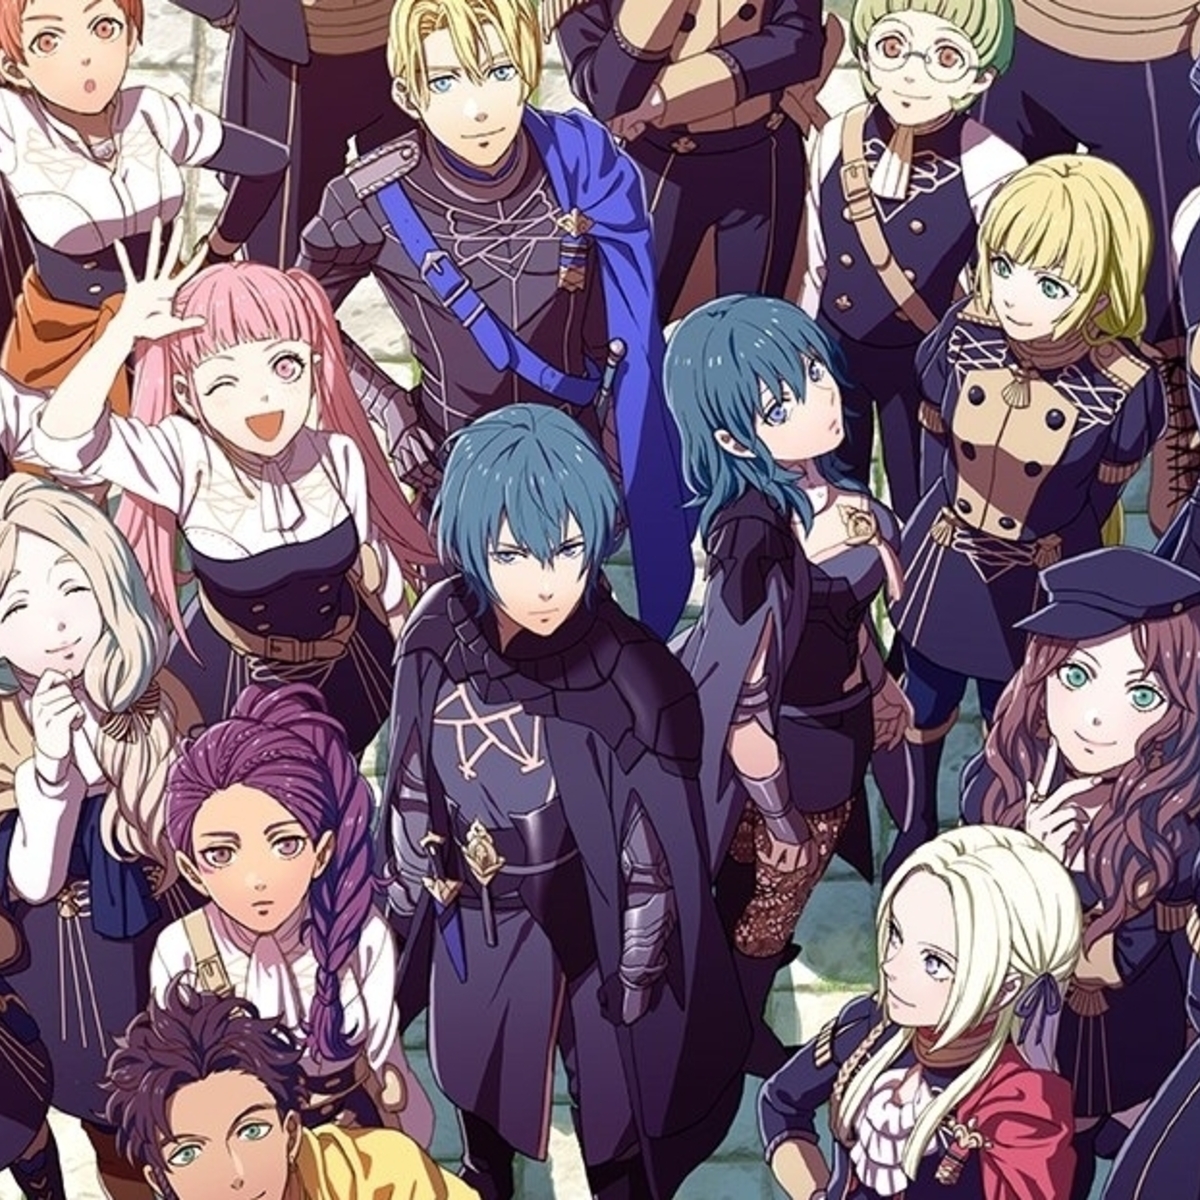 Fire Emblem Three Houses Wallpapers